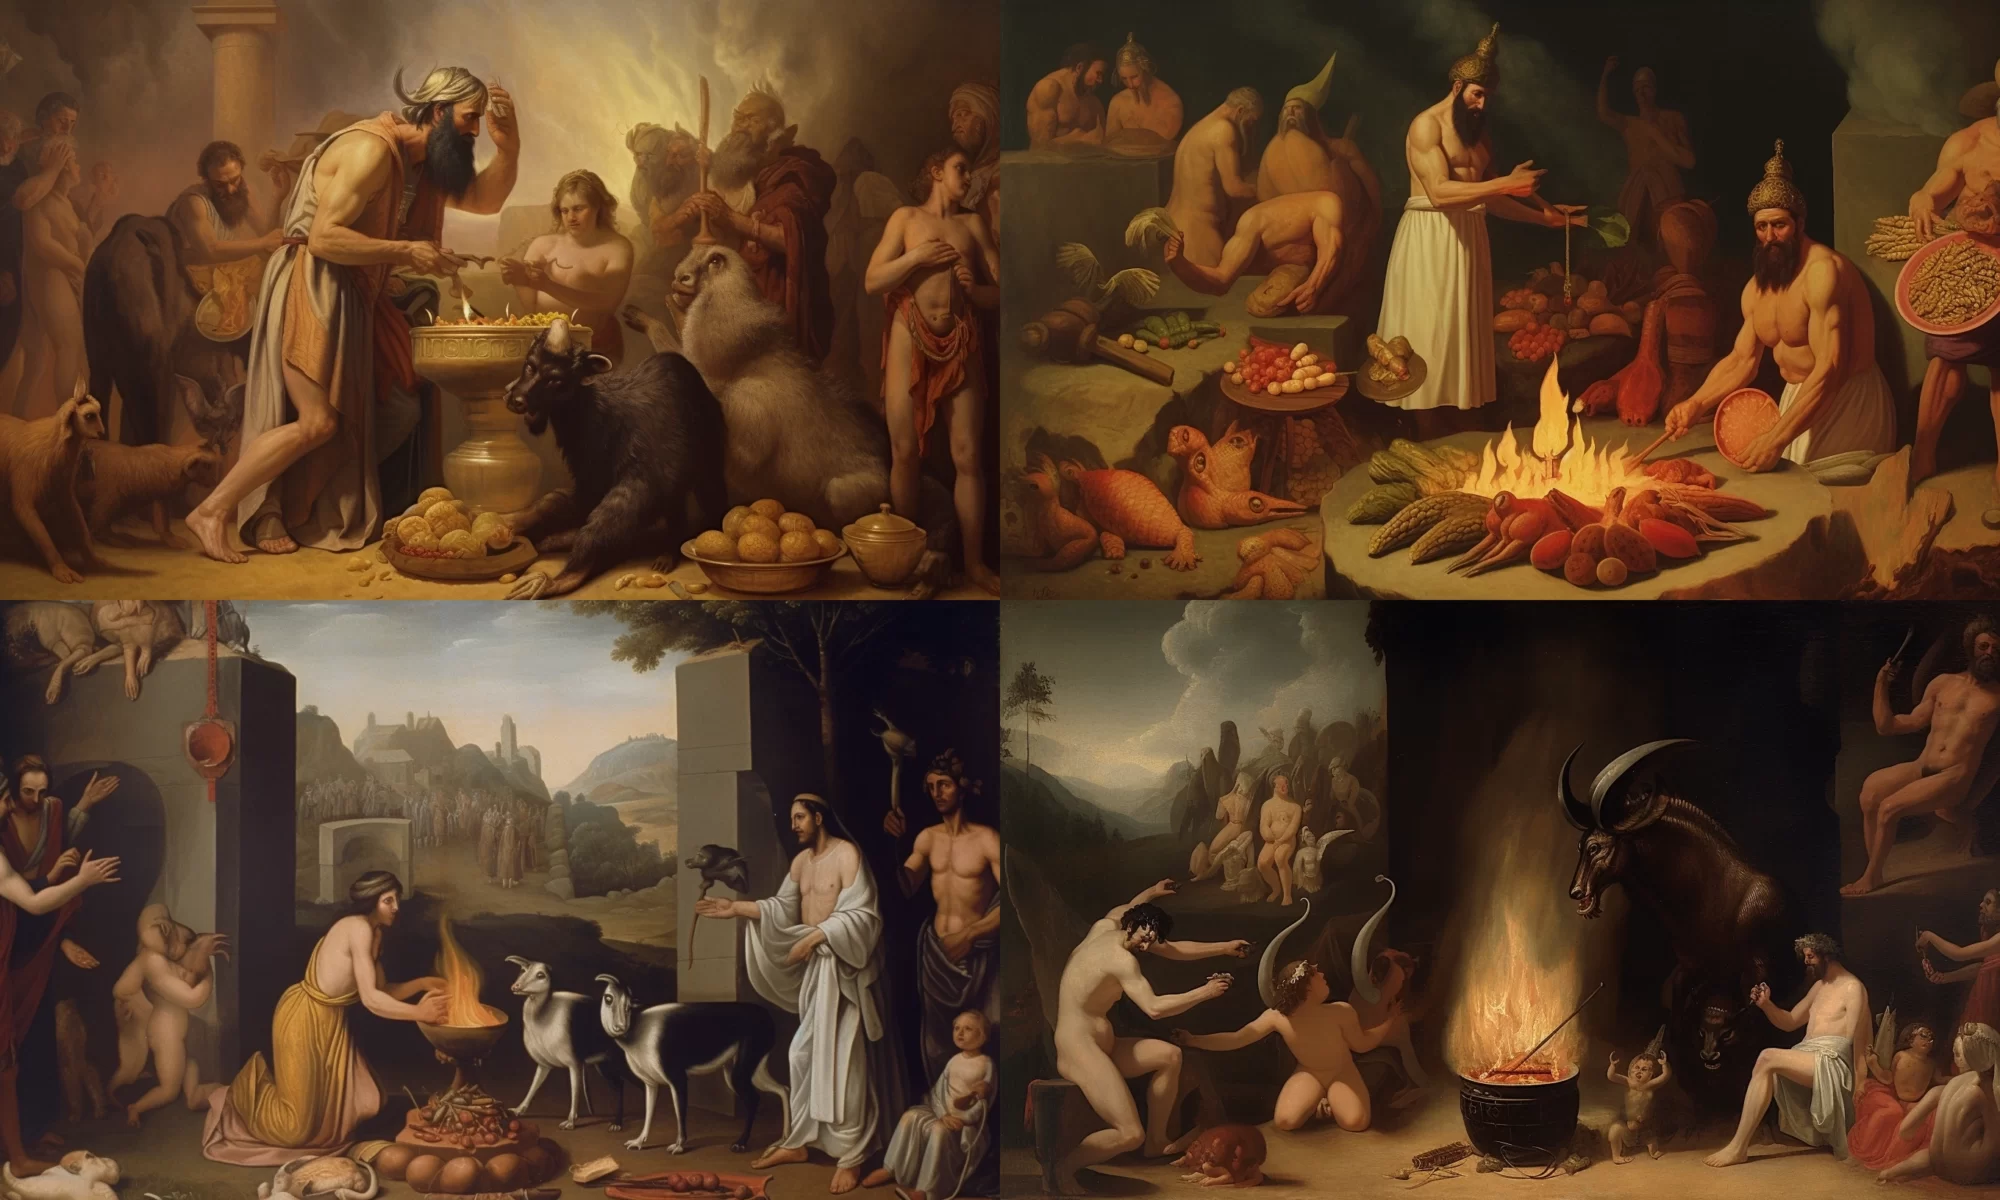 classical painting depicting people offering small sacrifices to Moloch, like fruits, grains, and livestock, to seek his favor and blessings and the sacrifices growing, and making Moloch too powerful